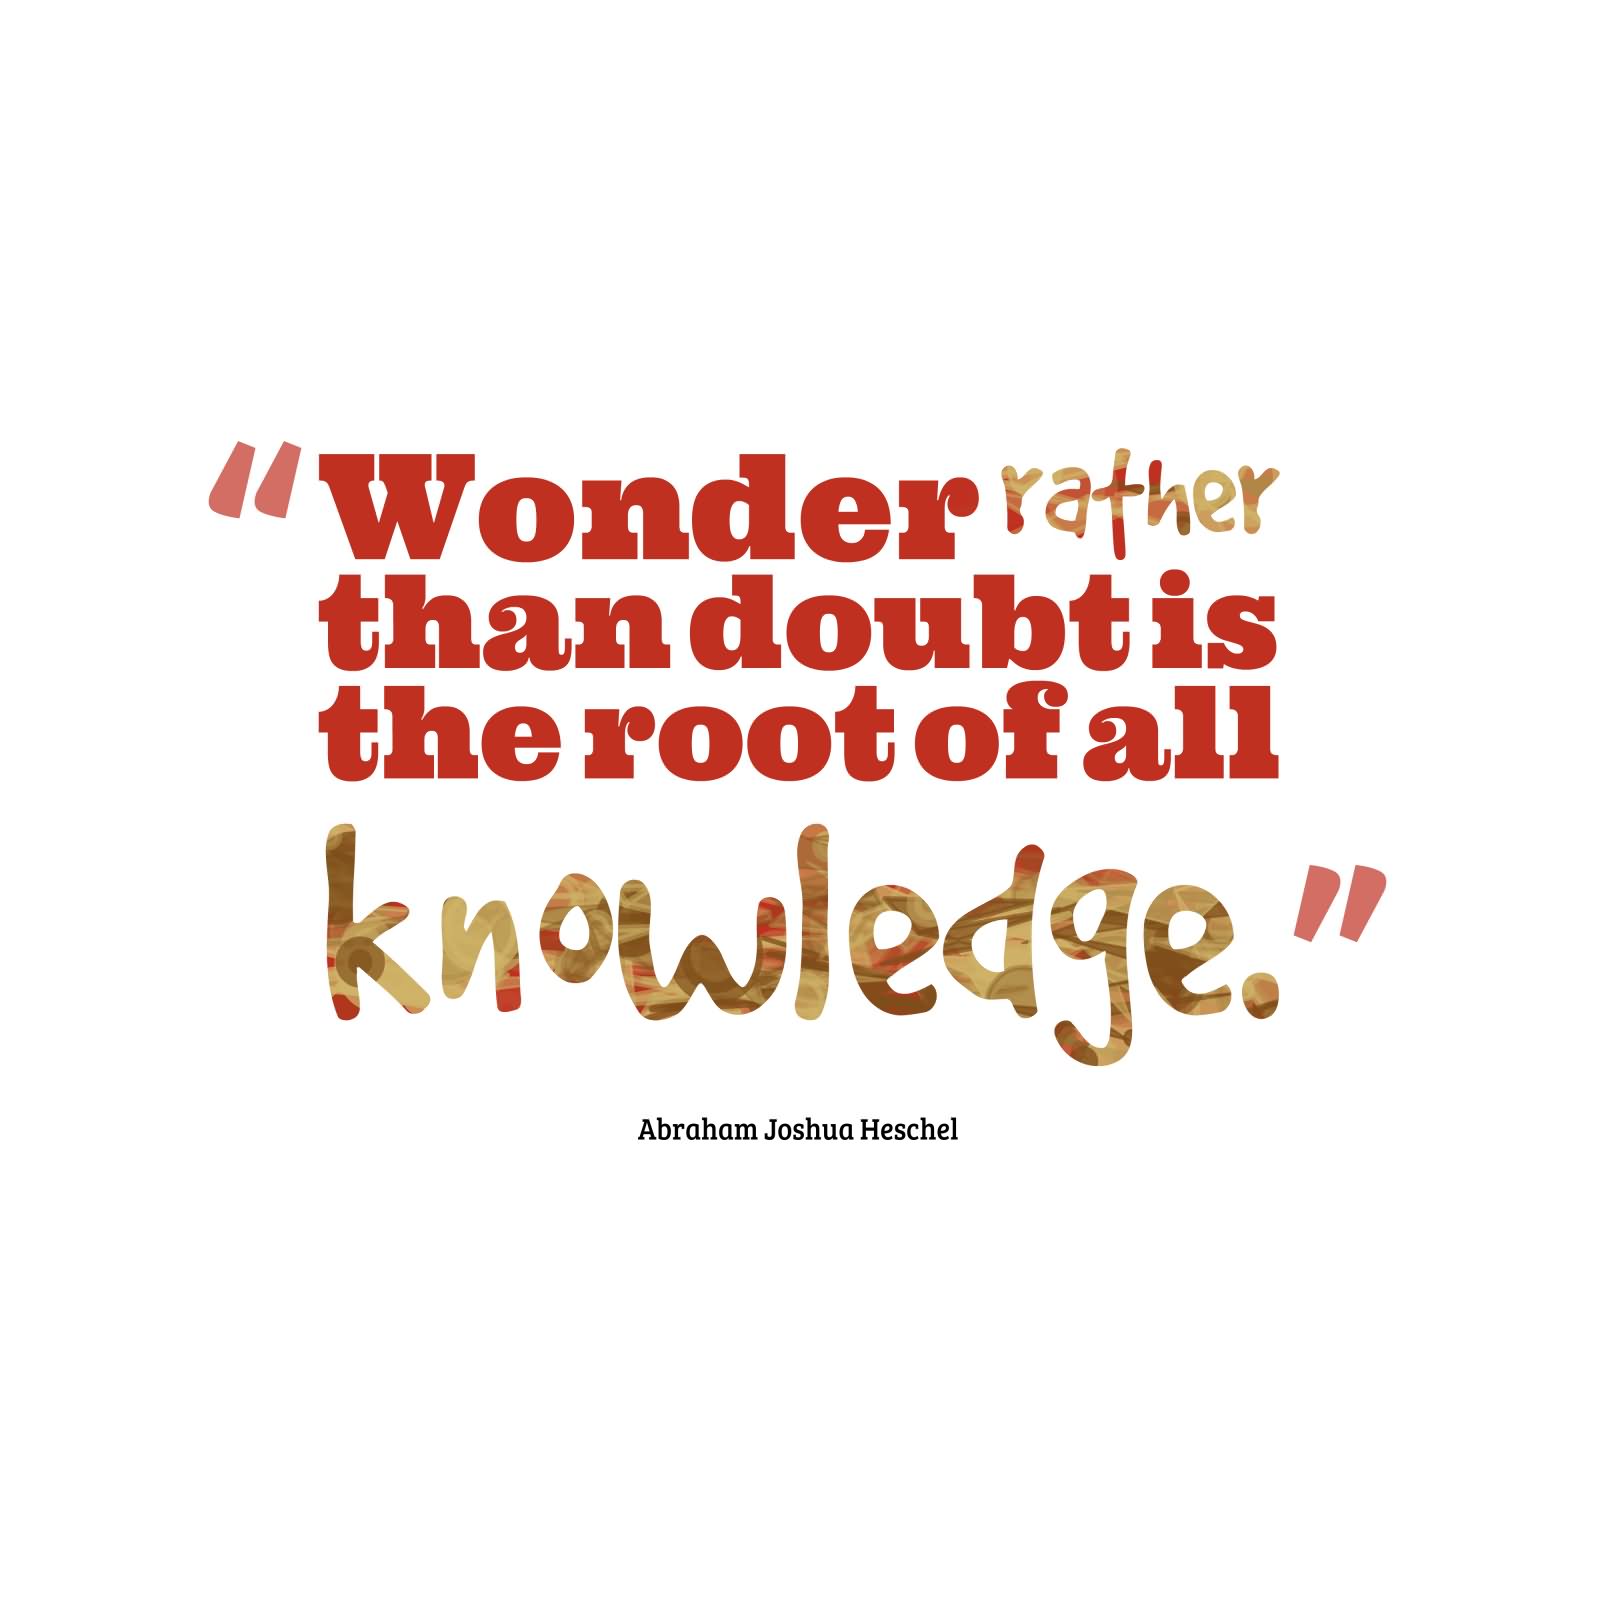 Wonder rather than doubt is the root of all Knowledge   -Abraham Joshua Heschel